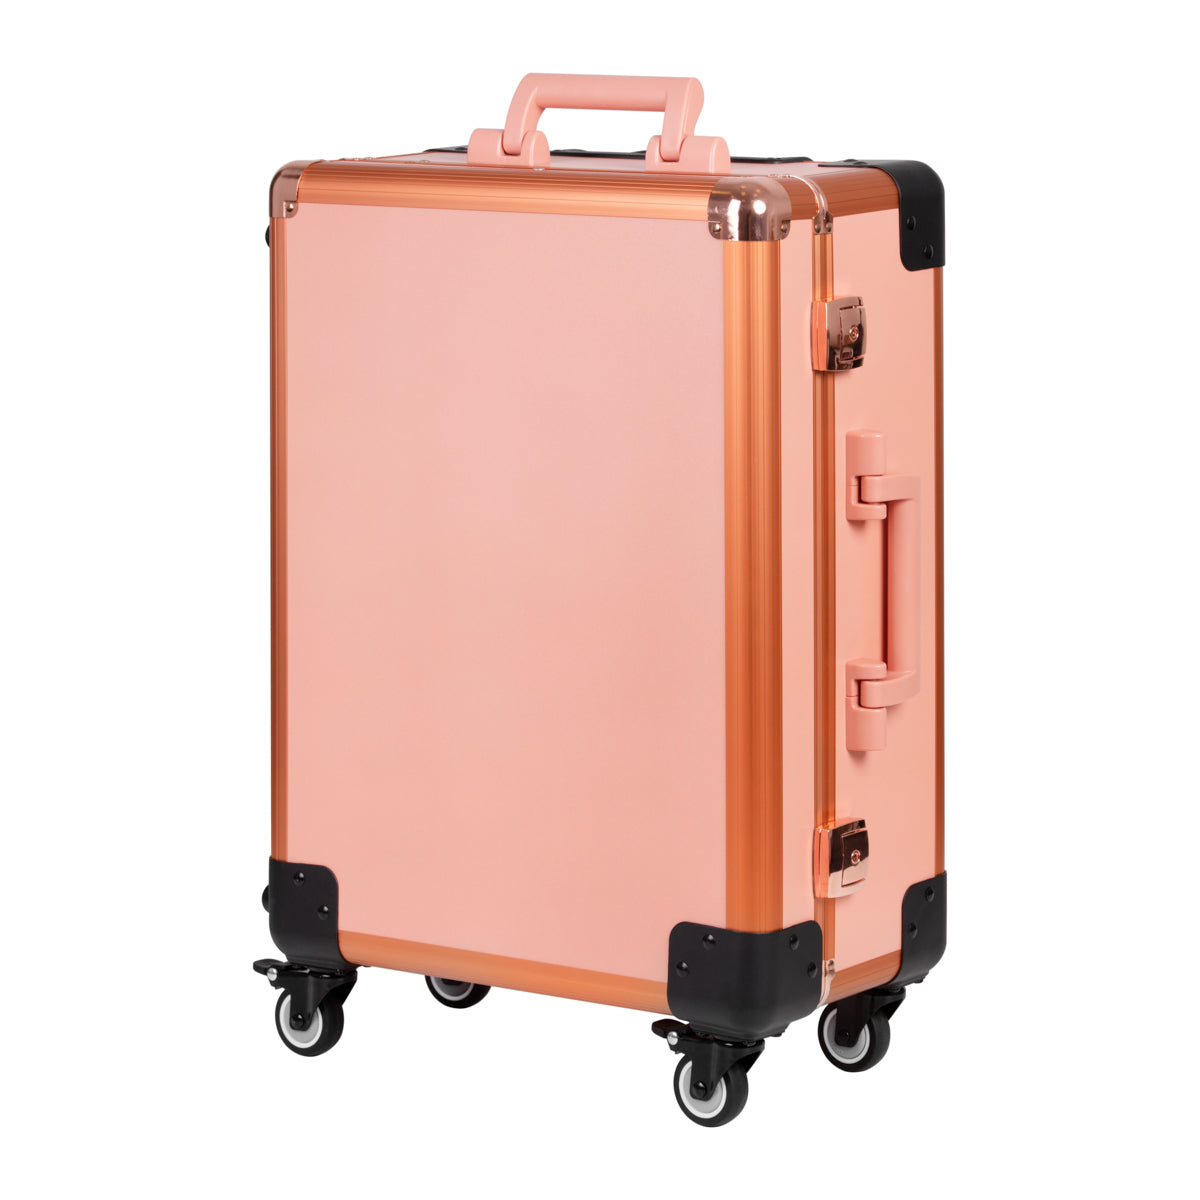 PORTABLE SUITCASE STAND T-27 ROSE GOLD